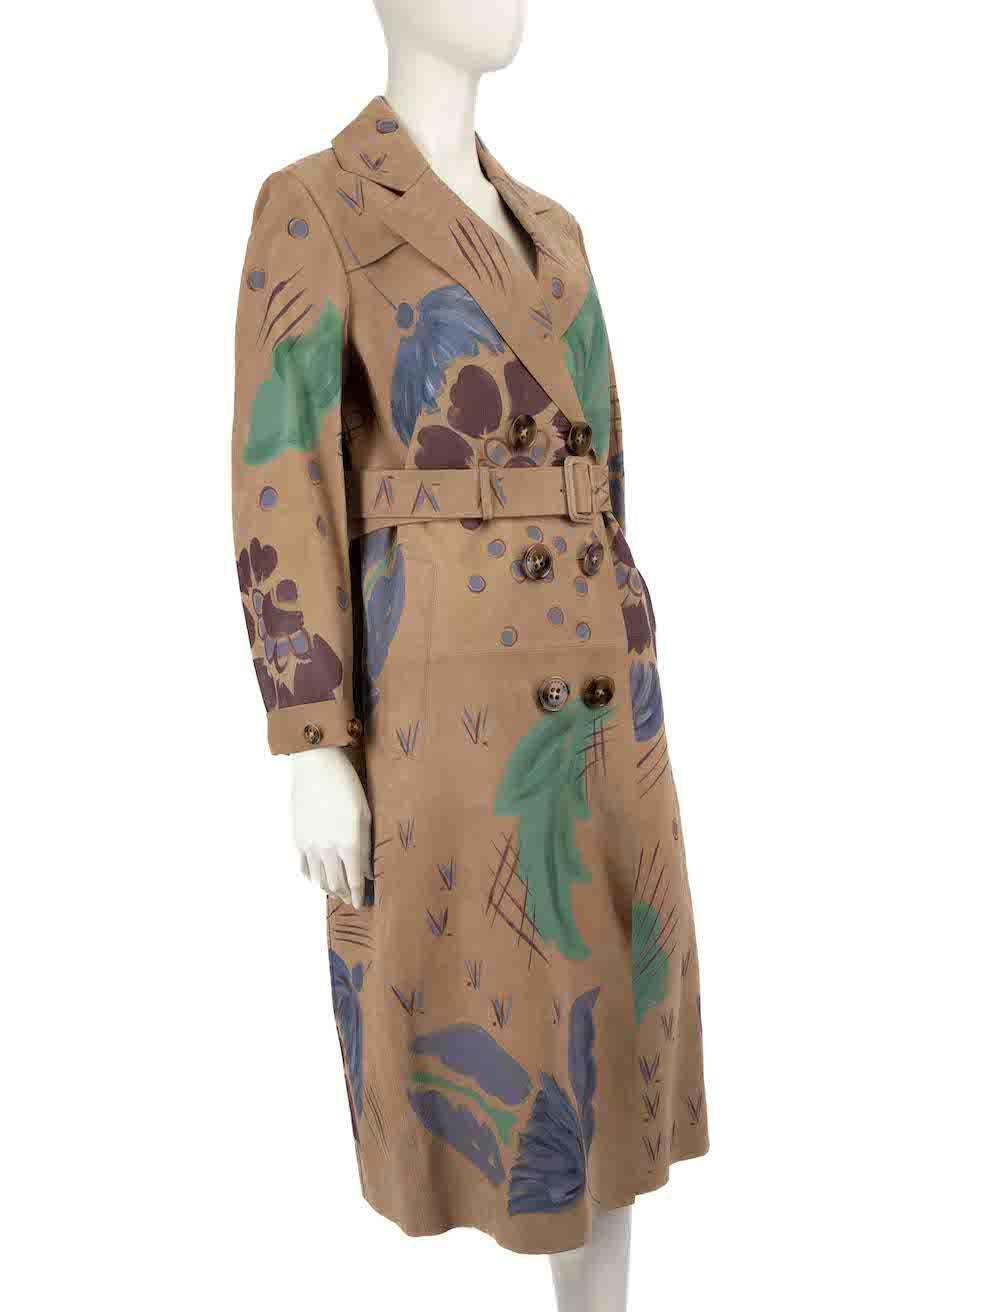 CONDITION is Never worn, with tags. No visible wear to coat is evident on this new Burberry designer resale item.
 
 
 
 Details
 
 
 Brown
 
 Leather
 
 Long trench coat
 
 Floral painted pattern
 
 Double breasted
 
 Button up fastening
 
 2x Side